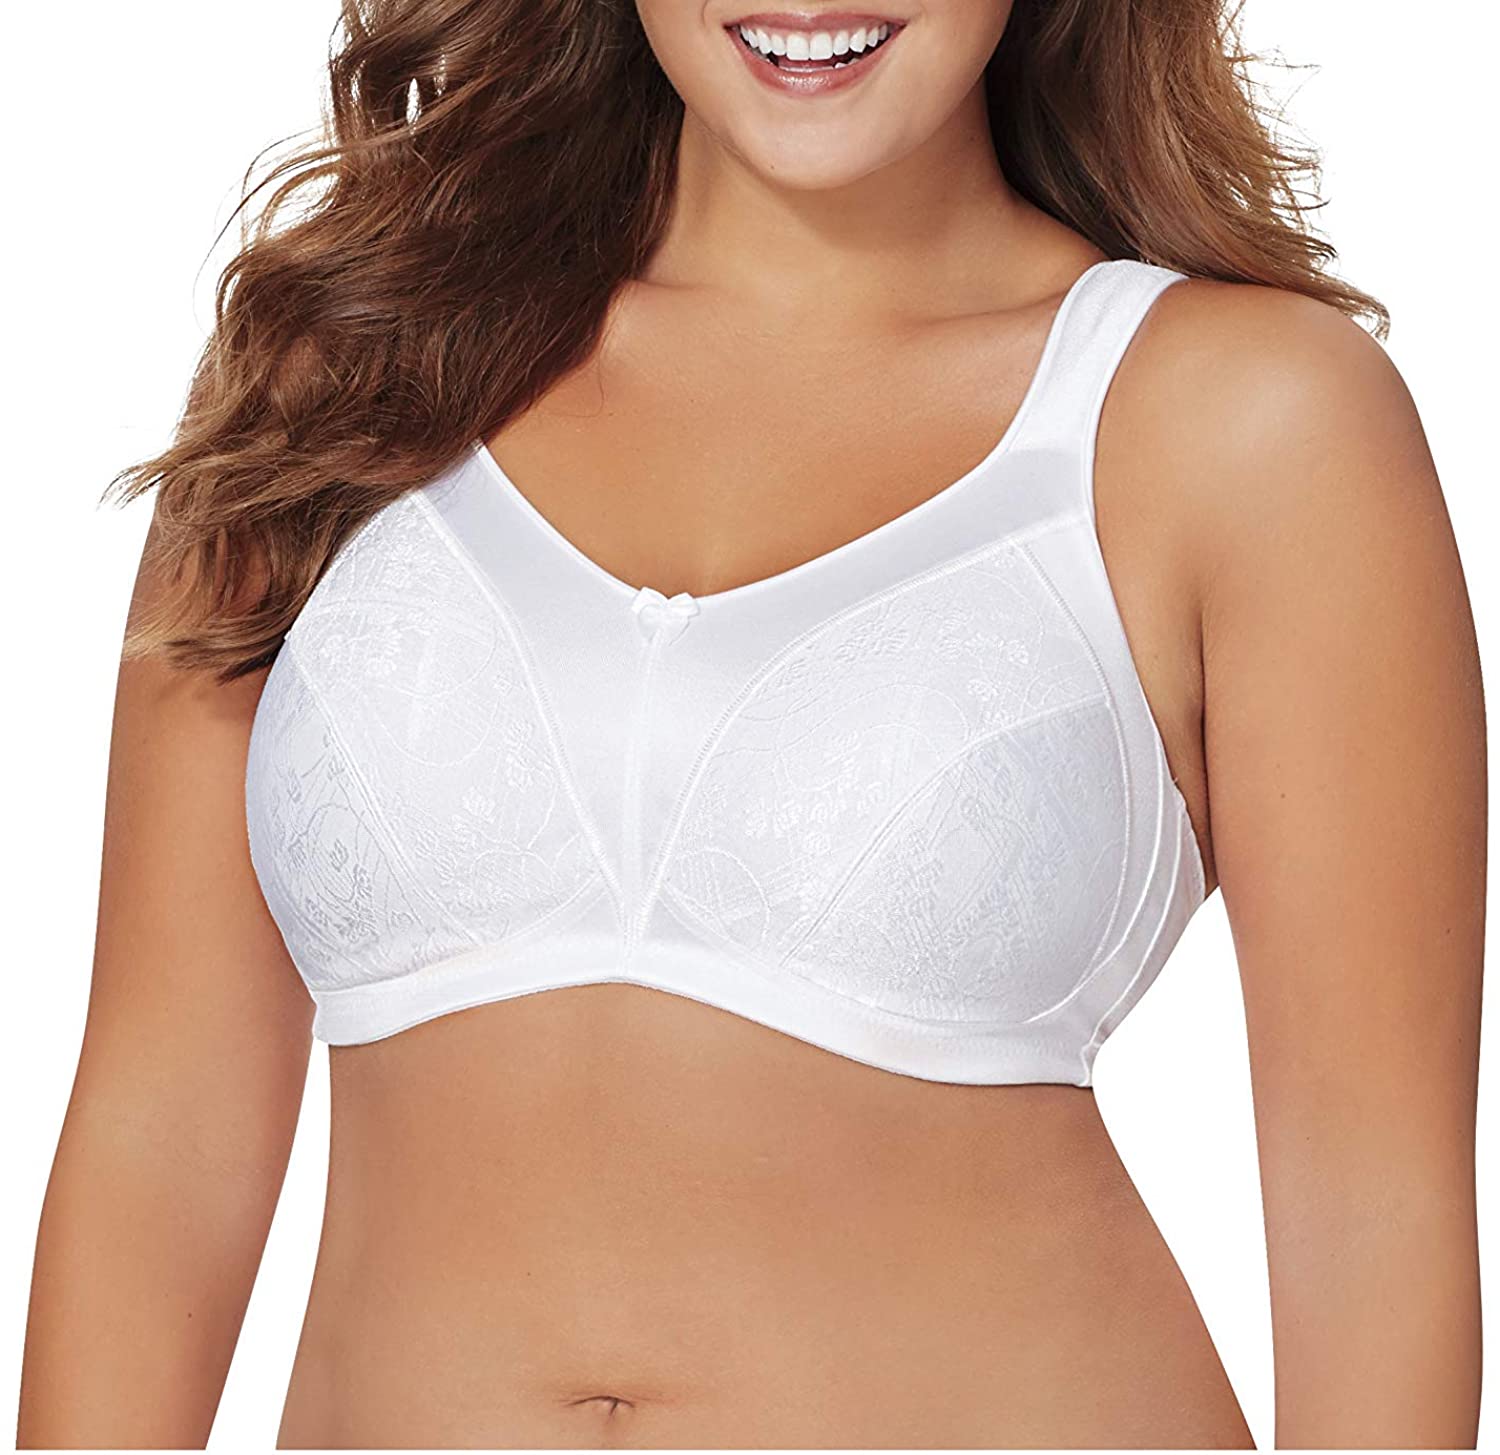 Just My Size Satin Stretch Wirefree, White, 38D at  Women's Clothing  store: Bras